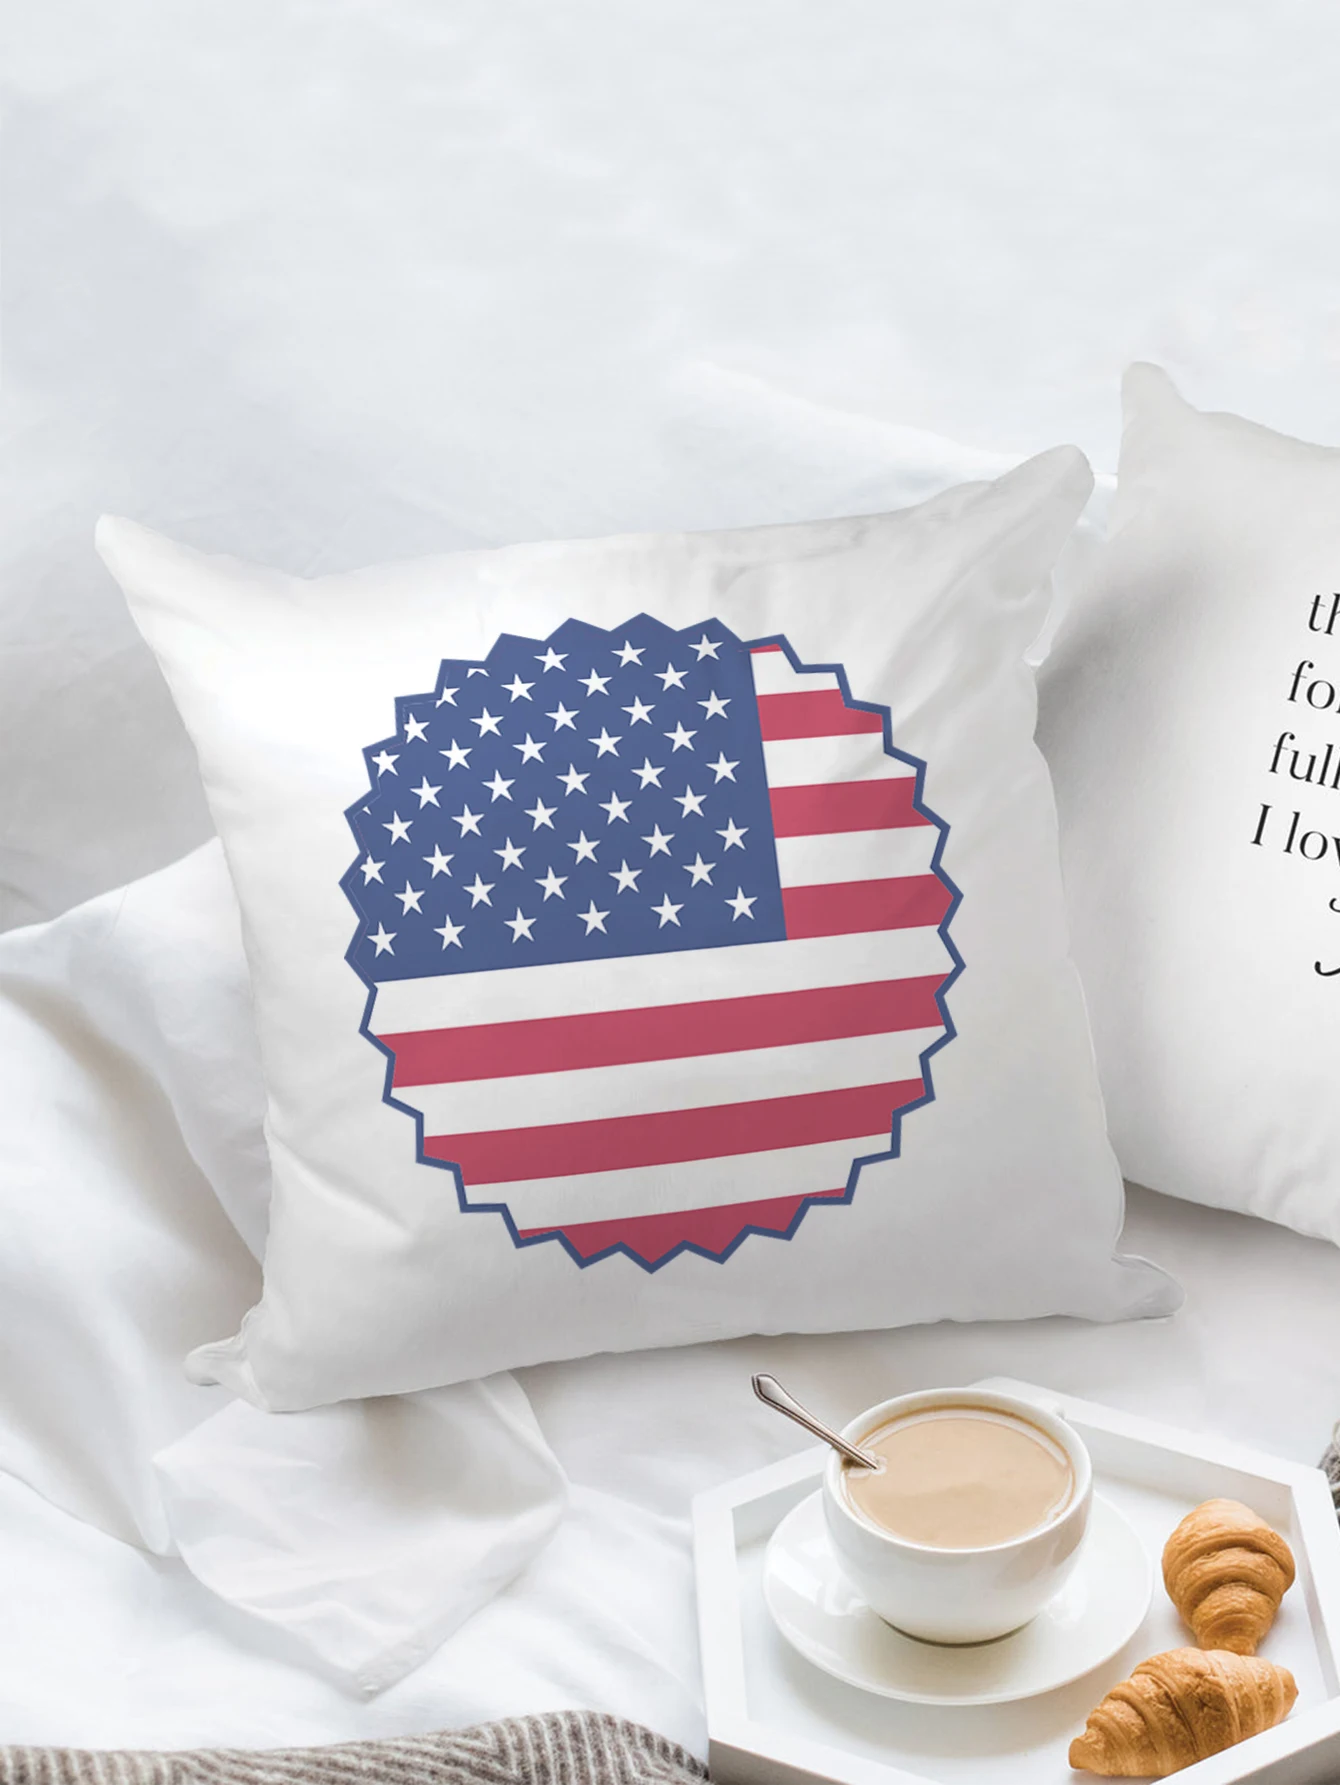 New Square Cushion Cover Decorative Independence Day Polyester Throw Pillows Bed Couch Home Decor Dakimakura Pillowcase Room